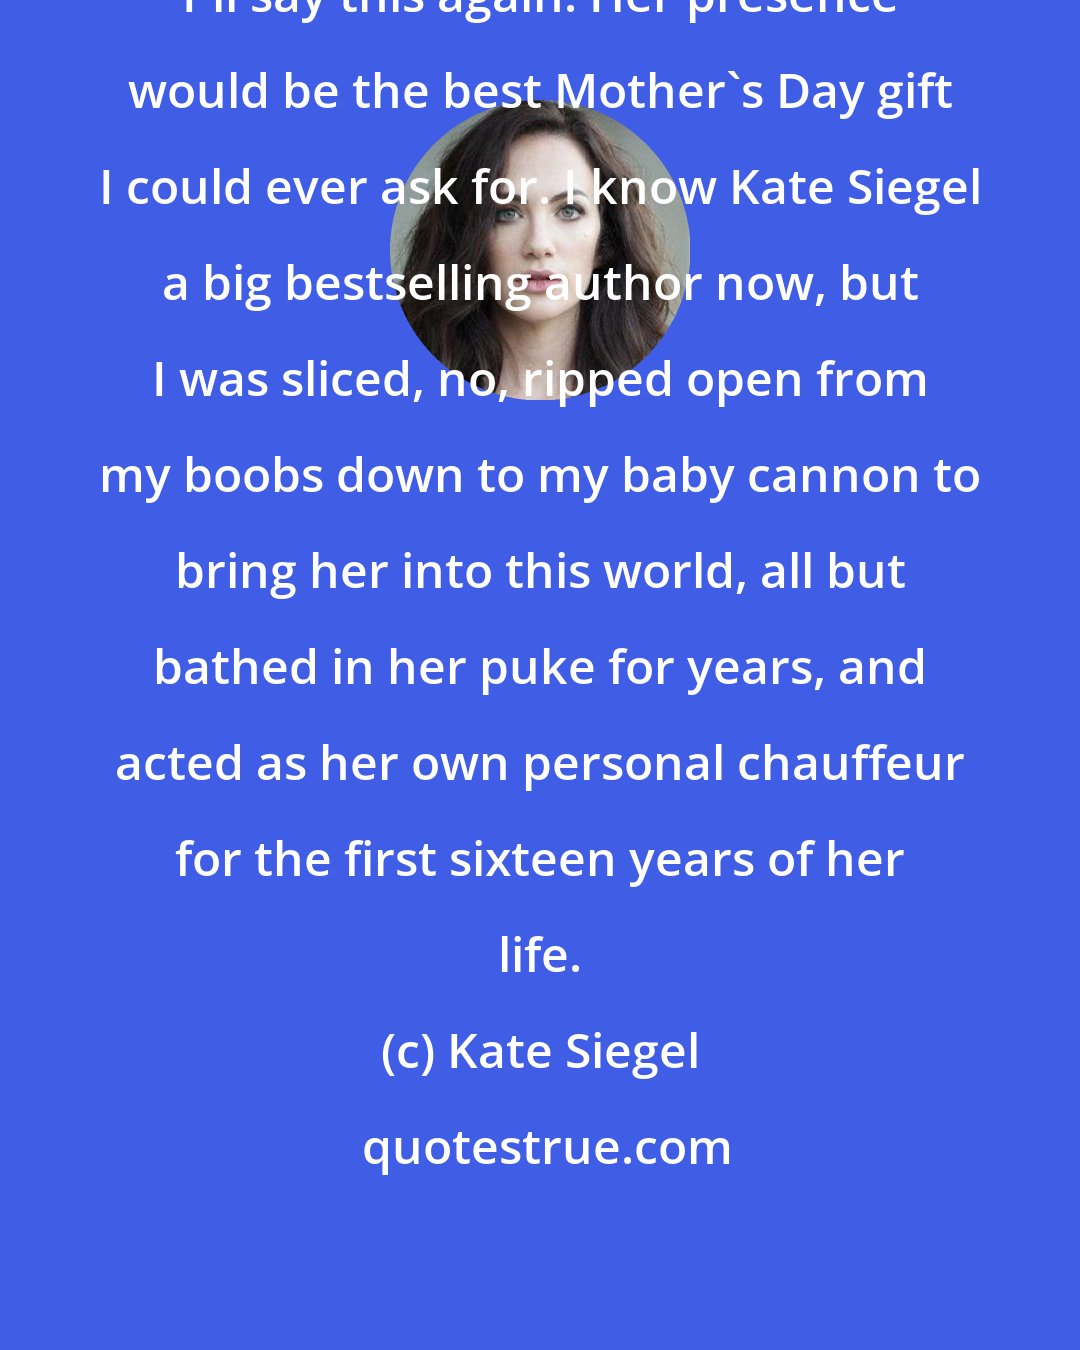 Kate Siegel: I'll say this again: Her presence would be the best Mother's Day gift I could ever ask for. I know Kate Siegel a big bestselling author now, but I was sliced, no, ripped open from my boobs down to my baby cannon to bring her into this world, all but bathed in her puke for years, and acted as her own personal chauffeur for the first sixteen years of her life.